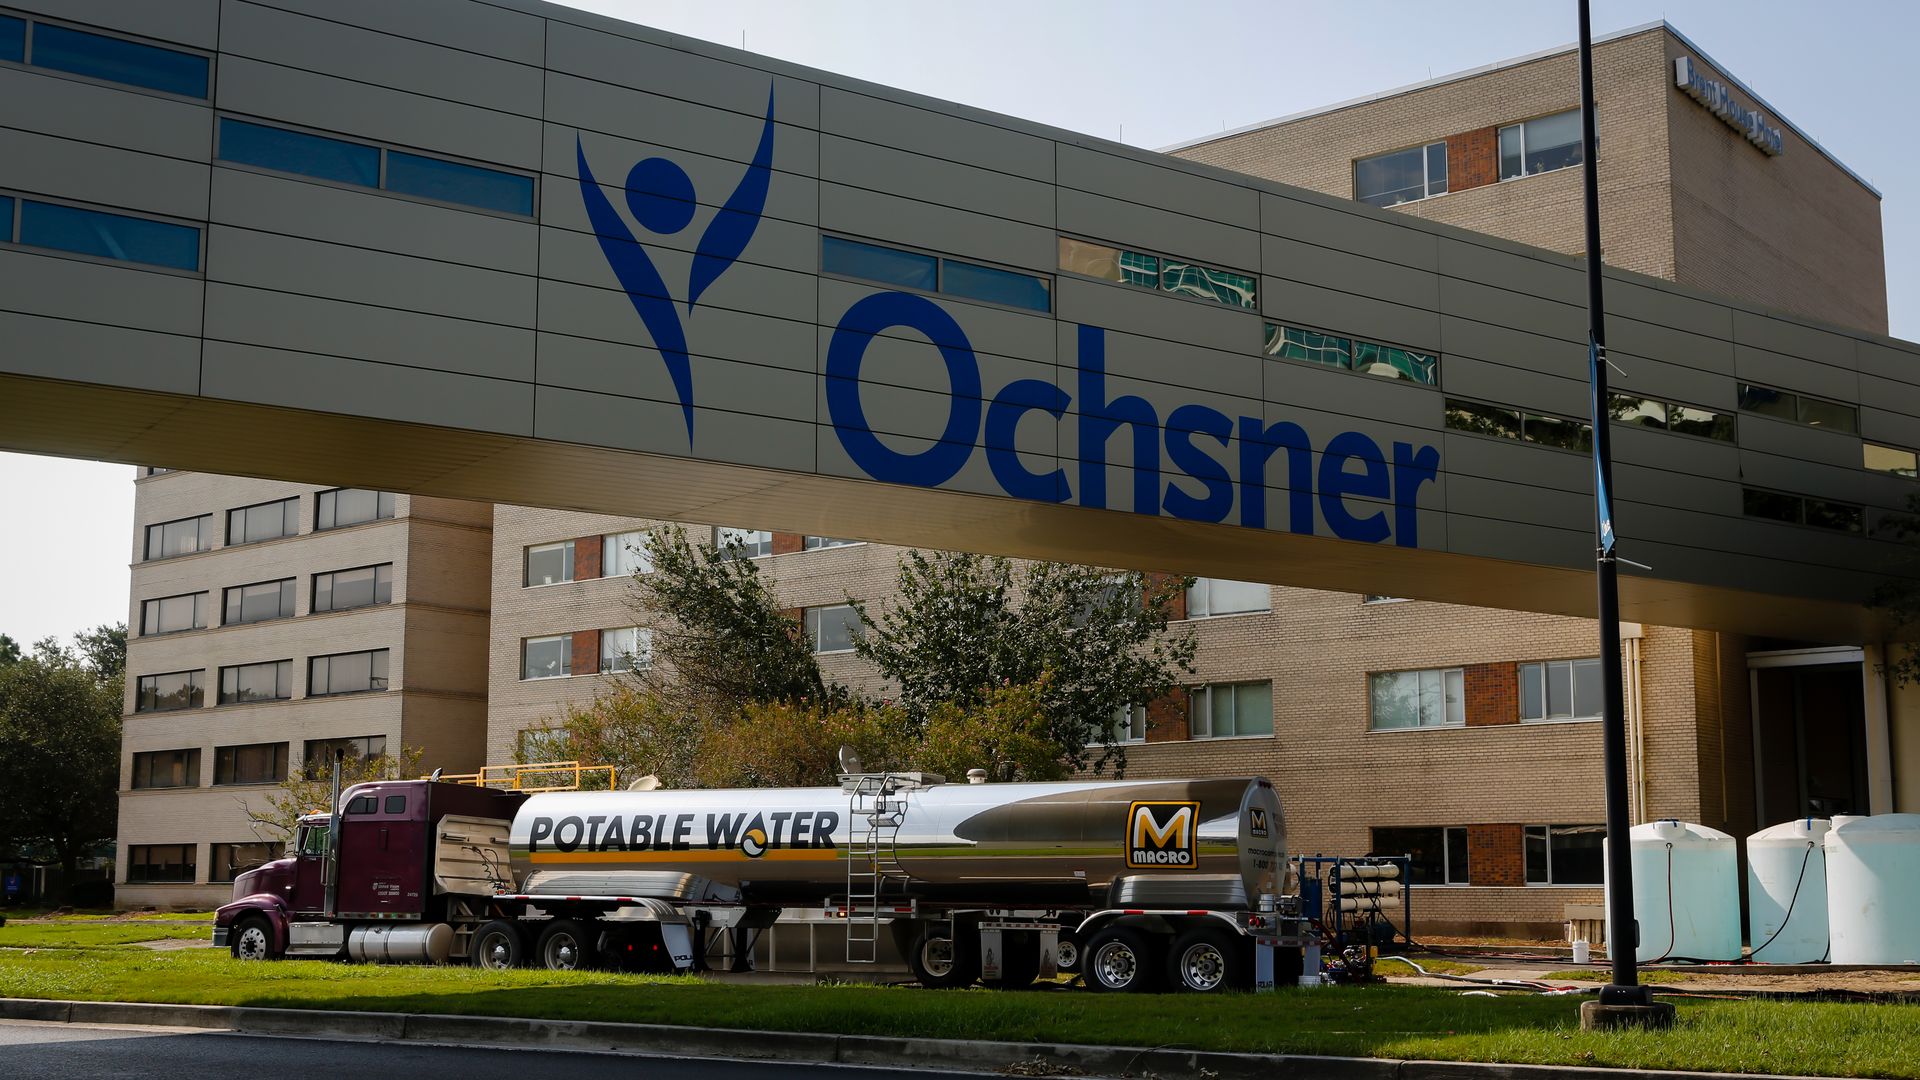 A potable water tanker in front of Ochsner Health Center after Hurricane Ida in New Orleans, Louisiana, U.S., on Thursday, Sept. 2, 2021.